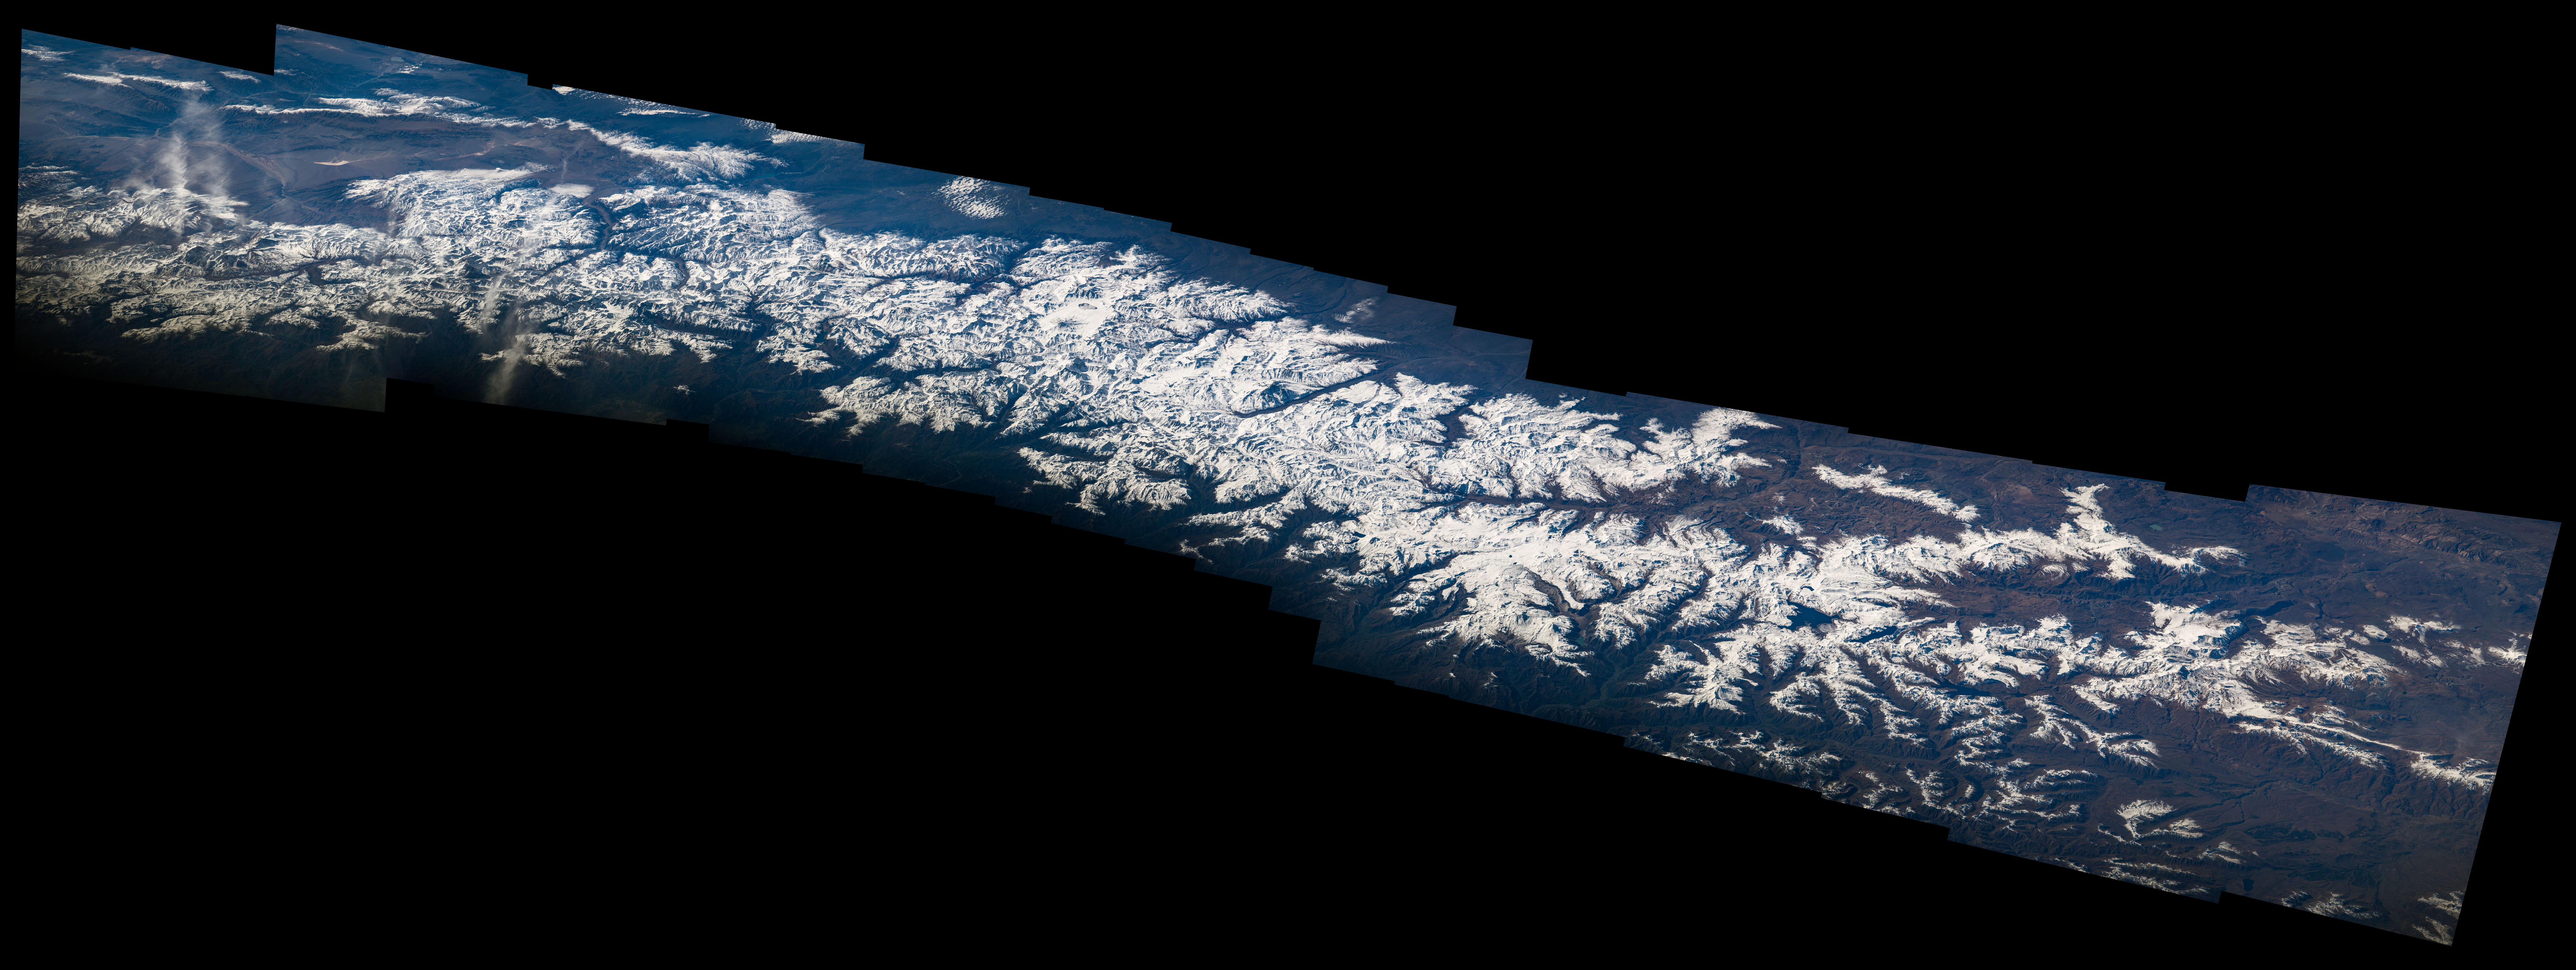 Central Andes Mountains